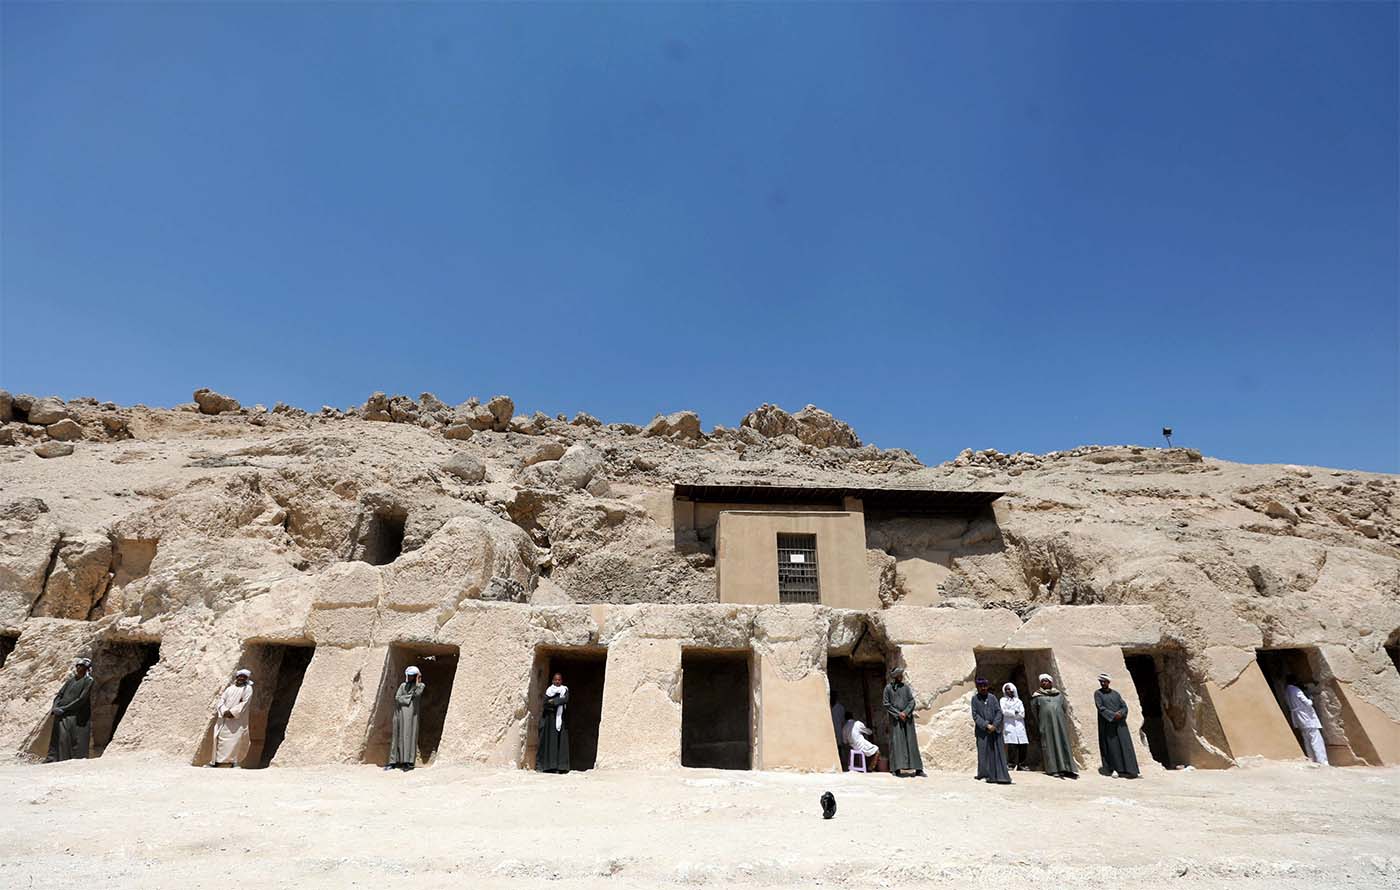 The tomb is the latest in a series unveiled by Egypt's ministry of antiquities